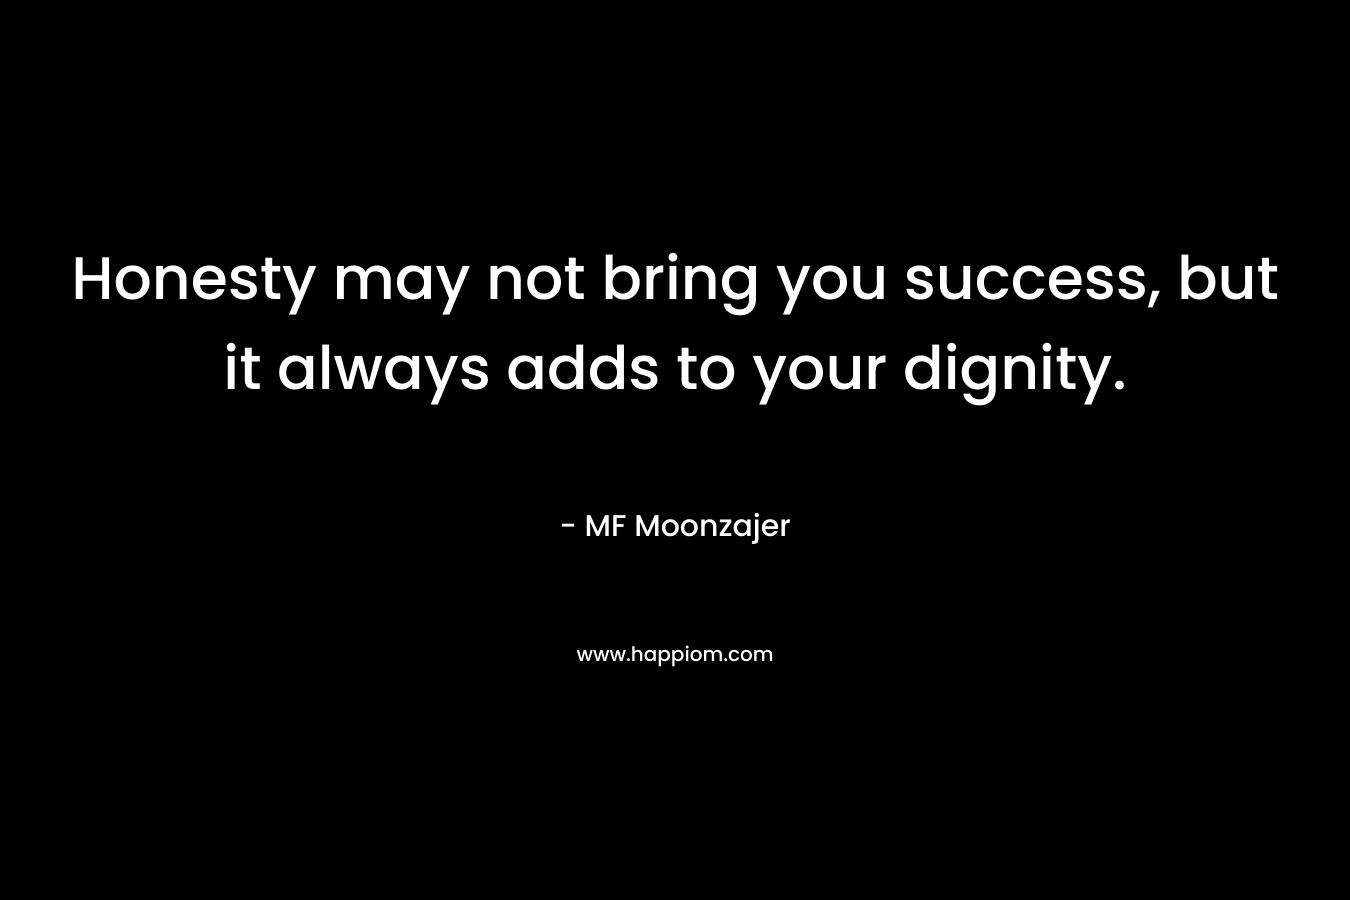 Honesty may not bring you success, but it always adds to your dignity.